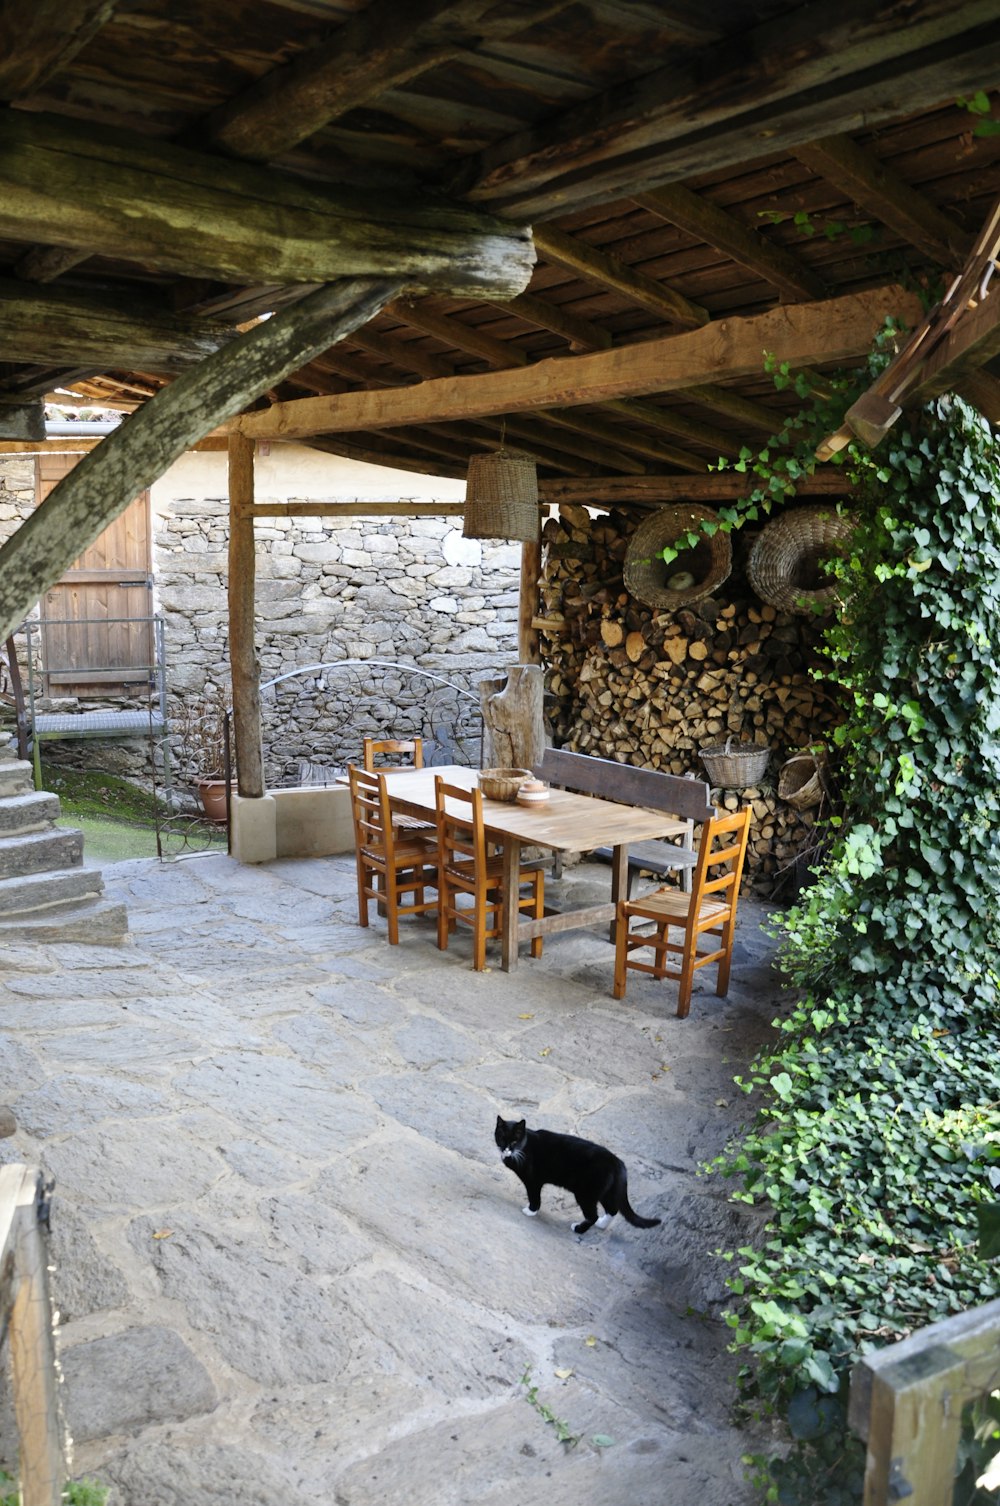 a black cat walking around a patio area